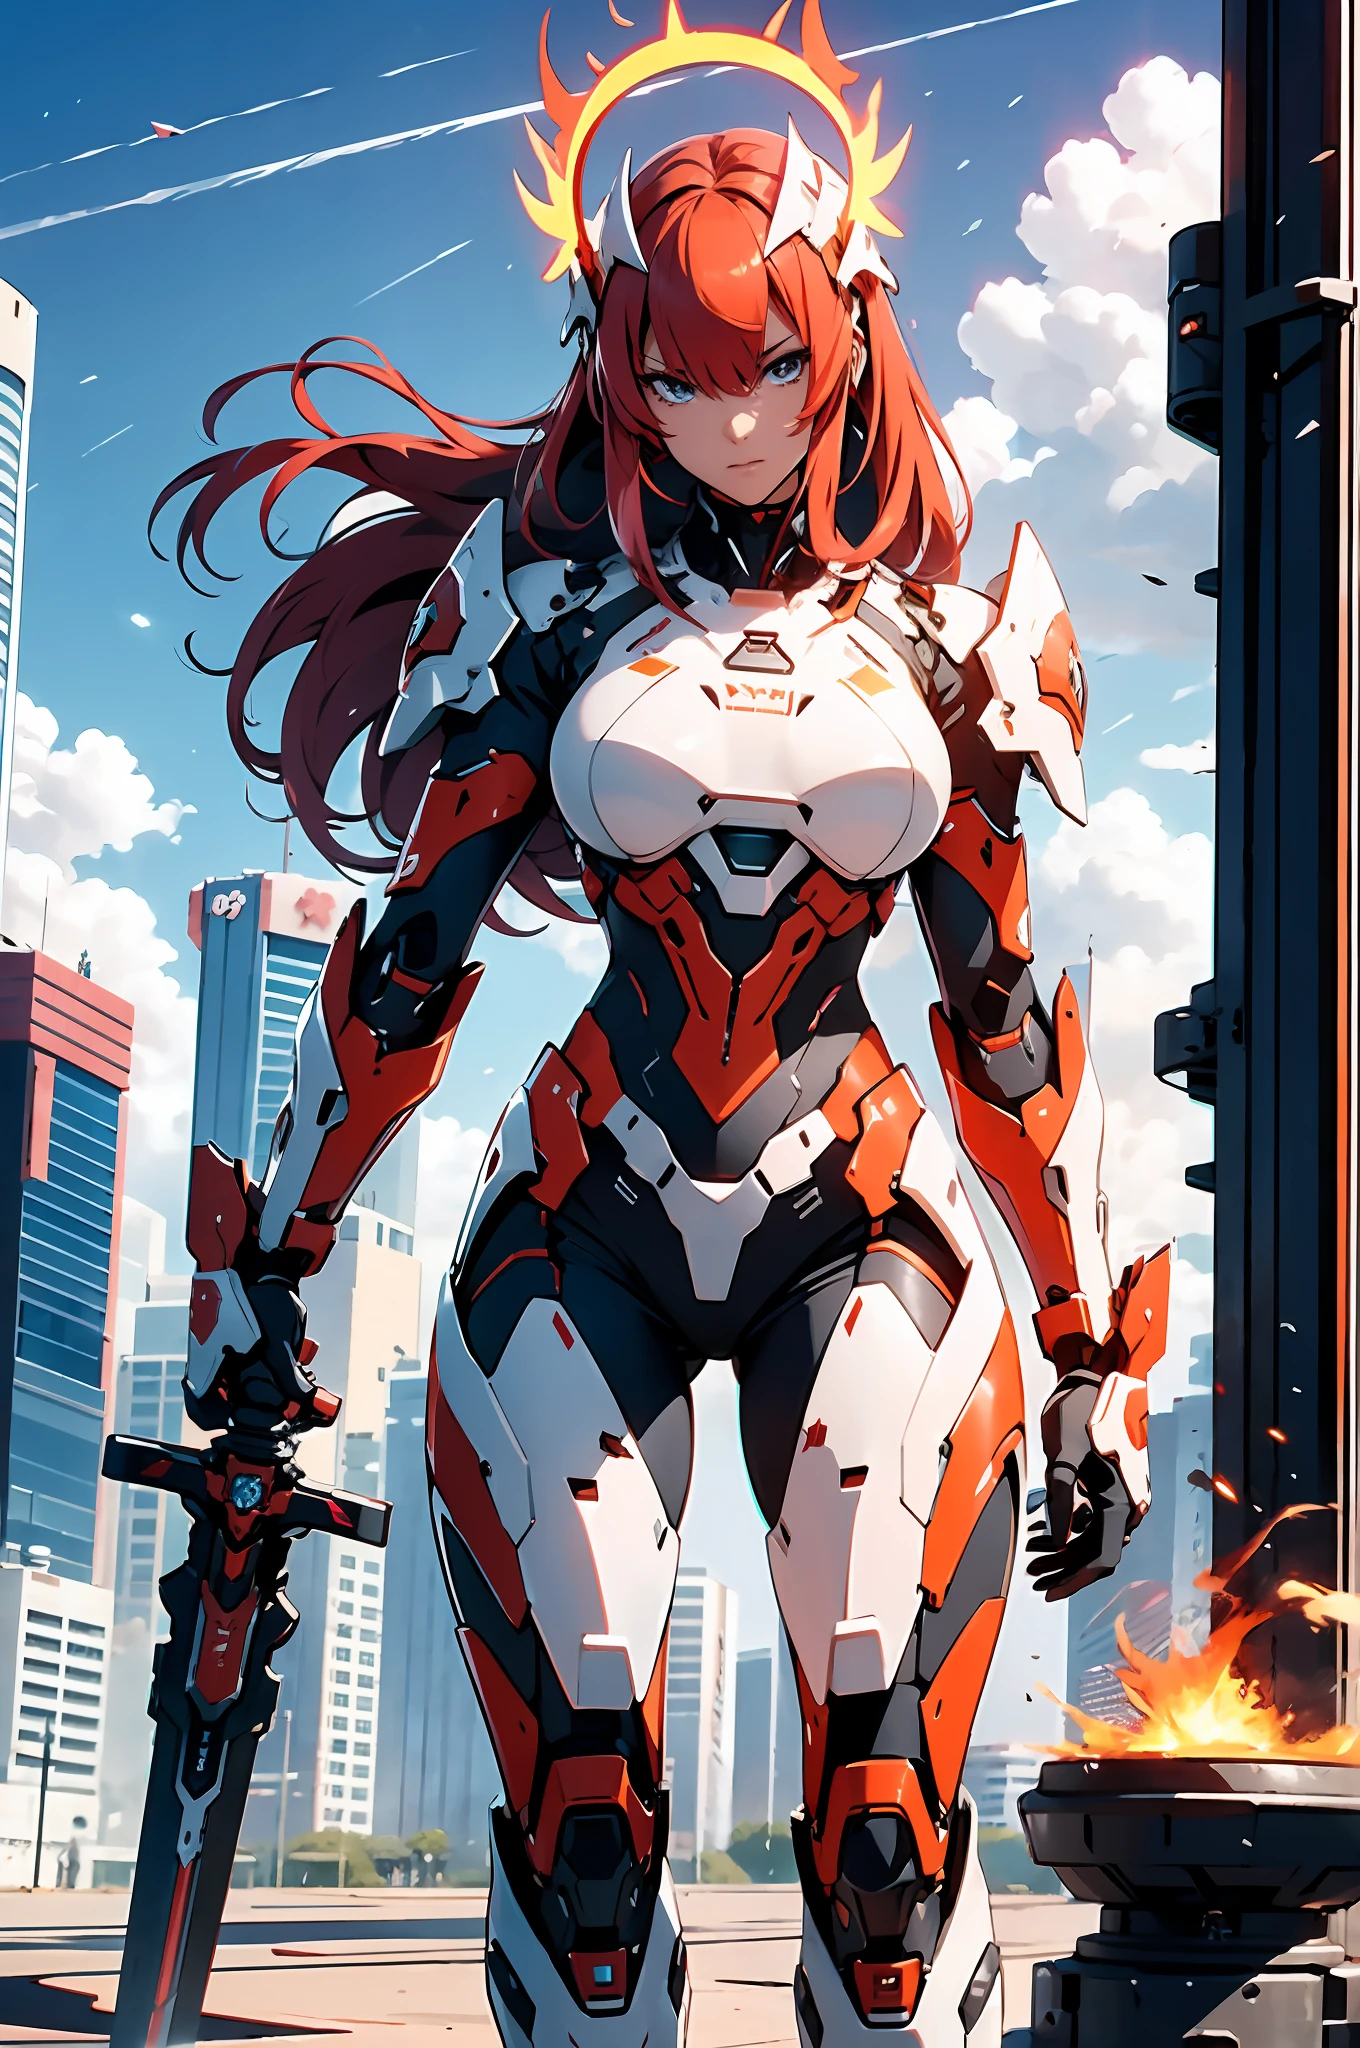 Futuristic style mecha, shining on the surface of the mecha, pink and red appearance, girl, slender waist, big breasts, big ass, flowing long fiery red hair, transparent face armor, nine-headed body, forward stance, wielding a long sword, holding a weapon in his hand, a long sword, a tail wing on his back, spraying flames, an angel halo on his head, surrounded by ruins, HD, CG image, ultra-wide-angle lens, gigantic